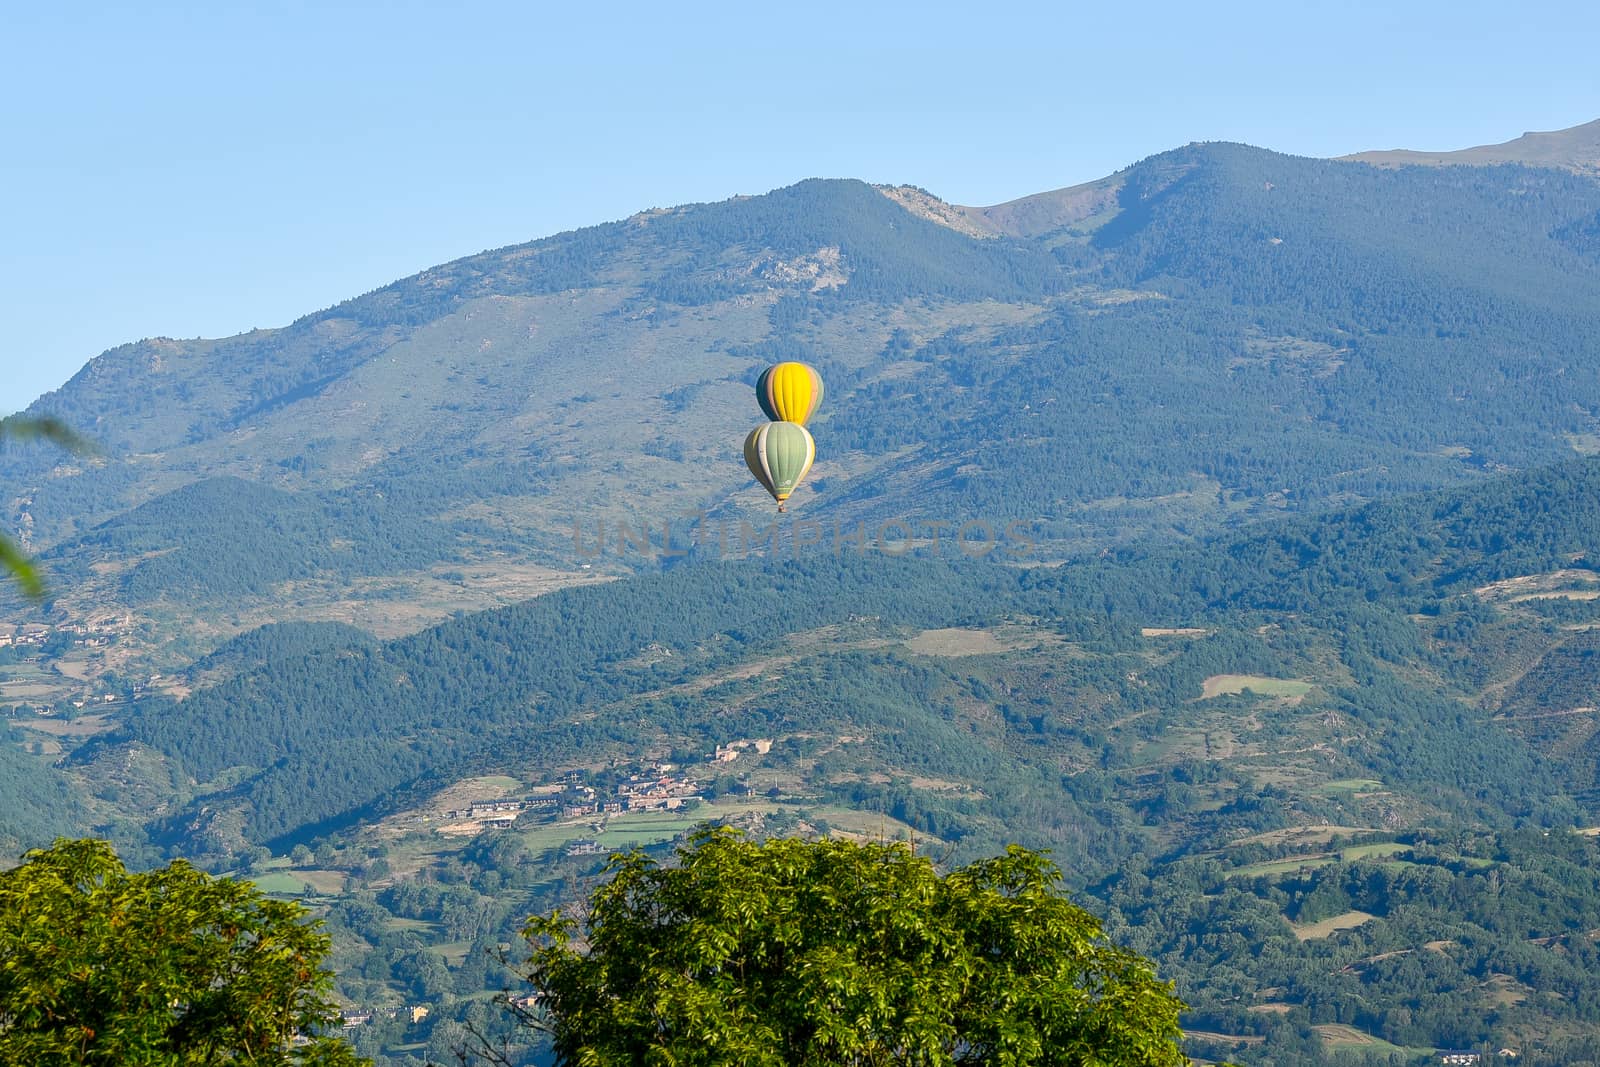 Colorful hot air balloons flying over the mountain in Puig Cerda, Spain.